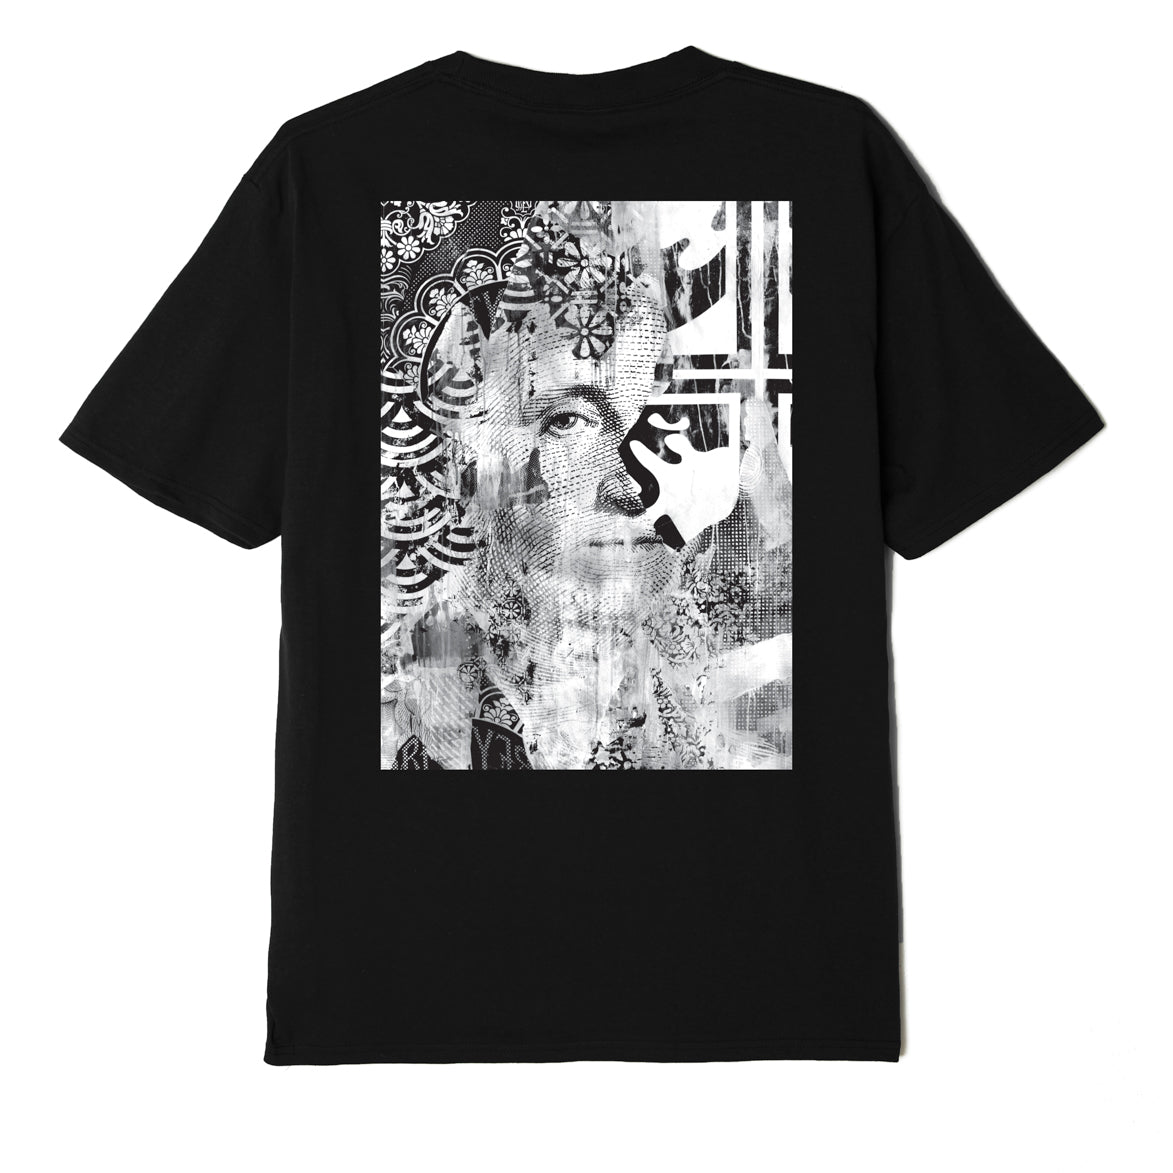 OBEY - C.R.E.A.M. Icons Men's Sustainable Tee,  Black